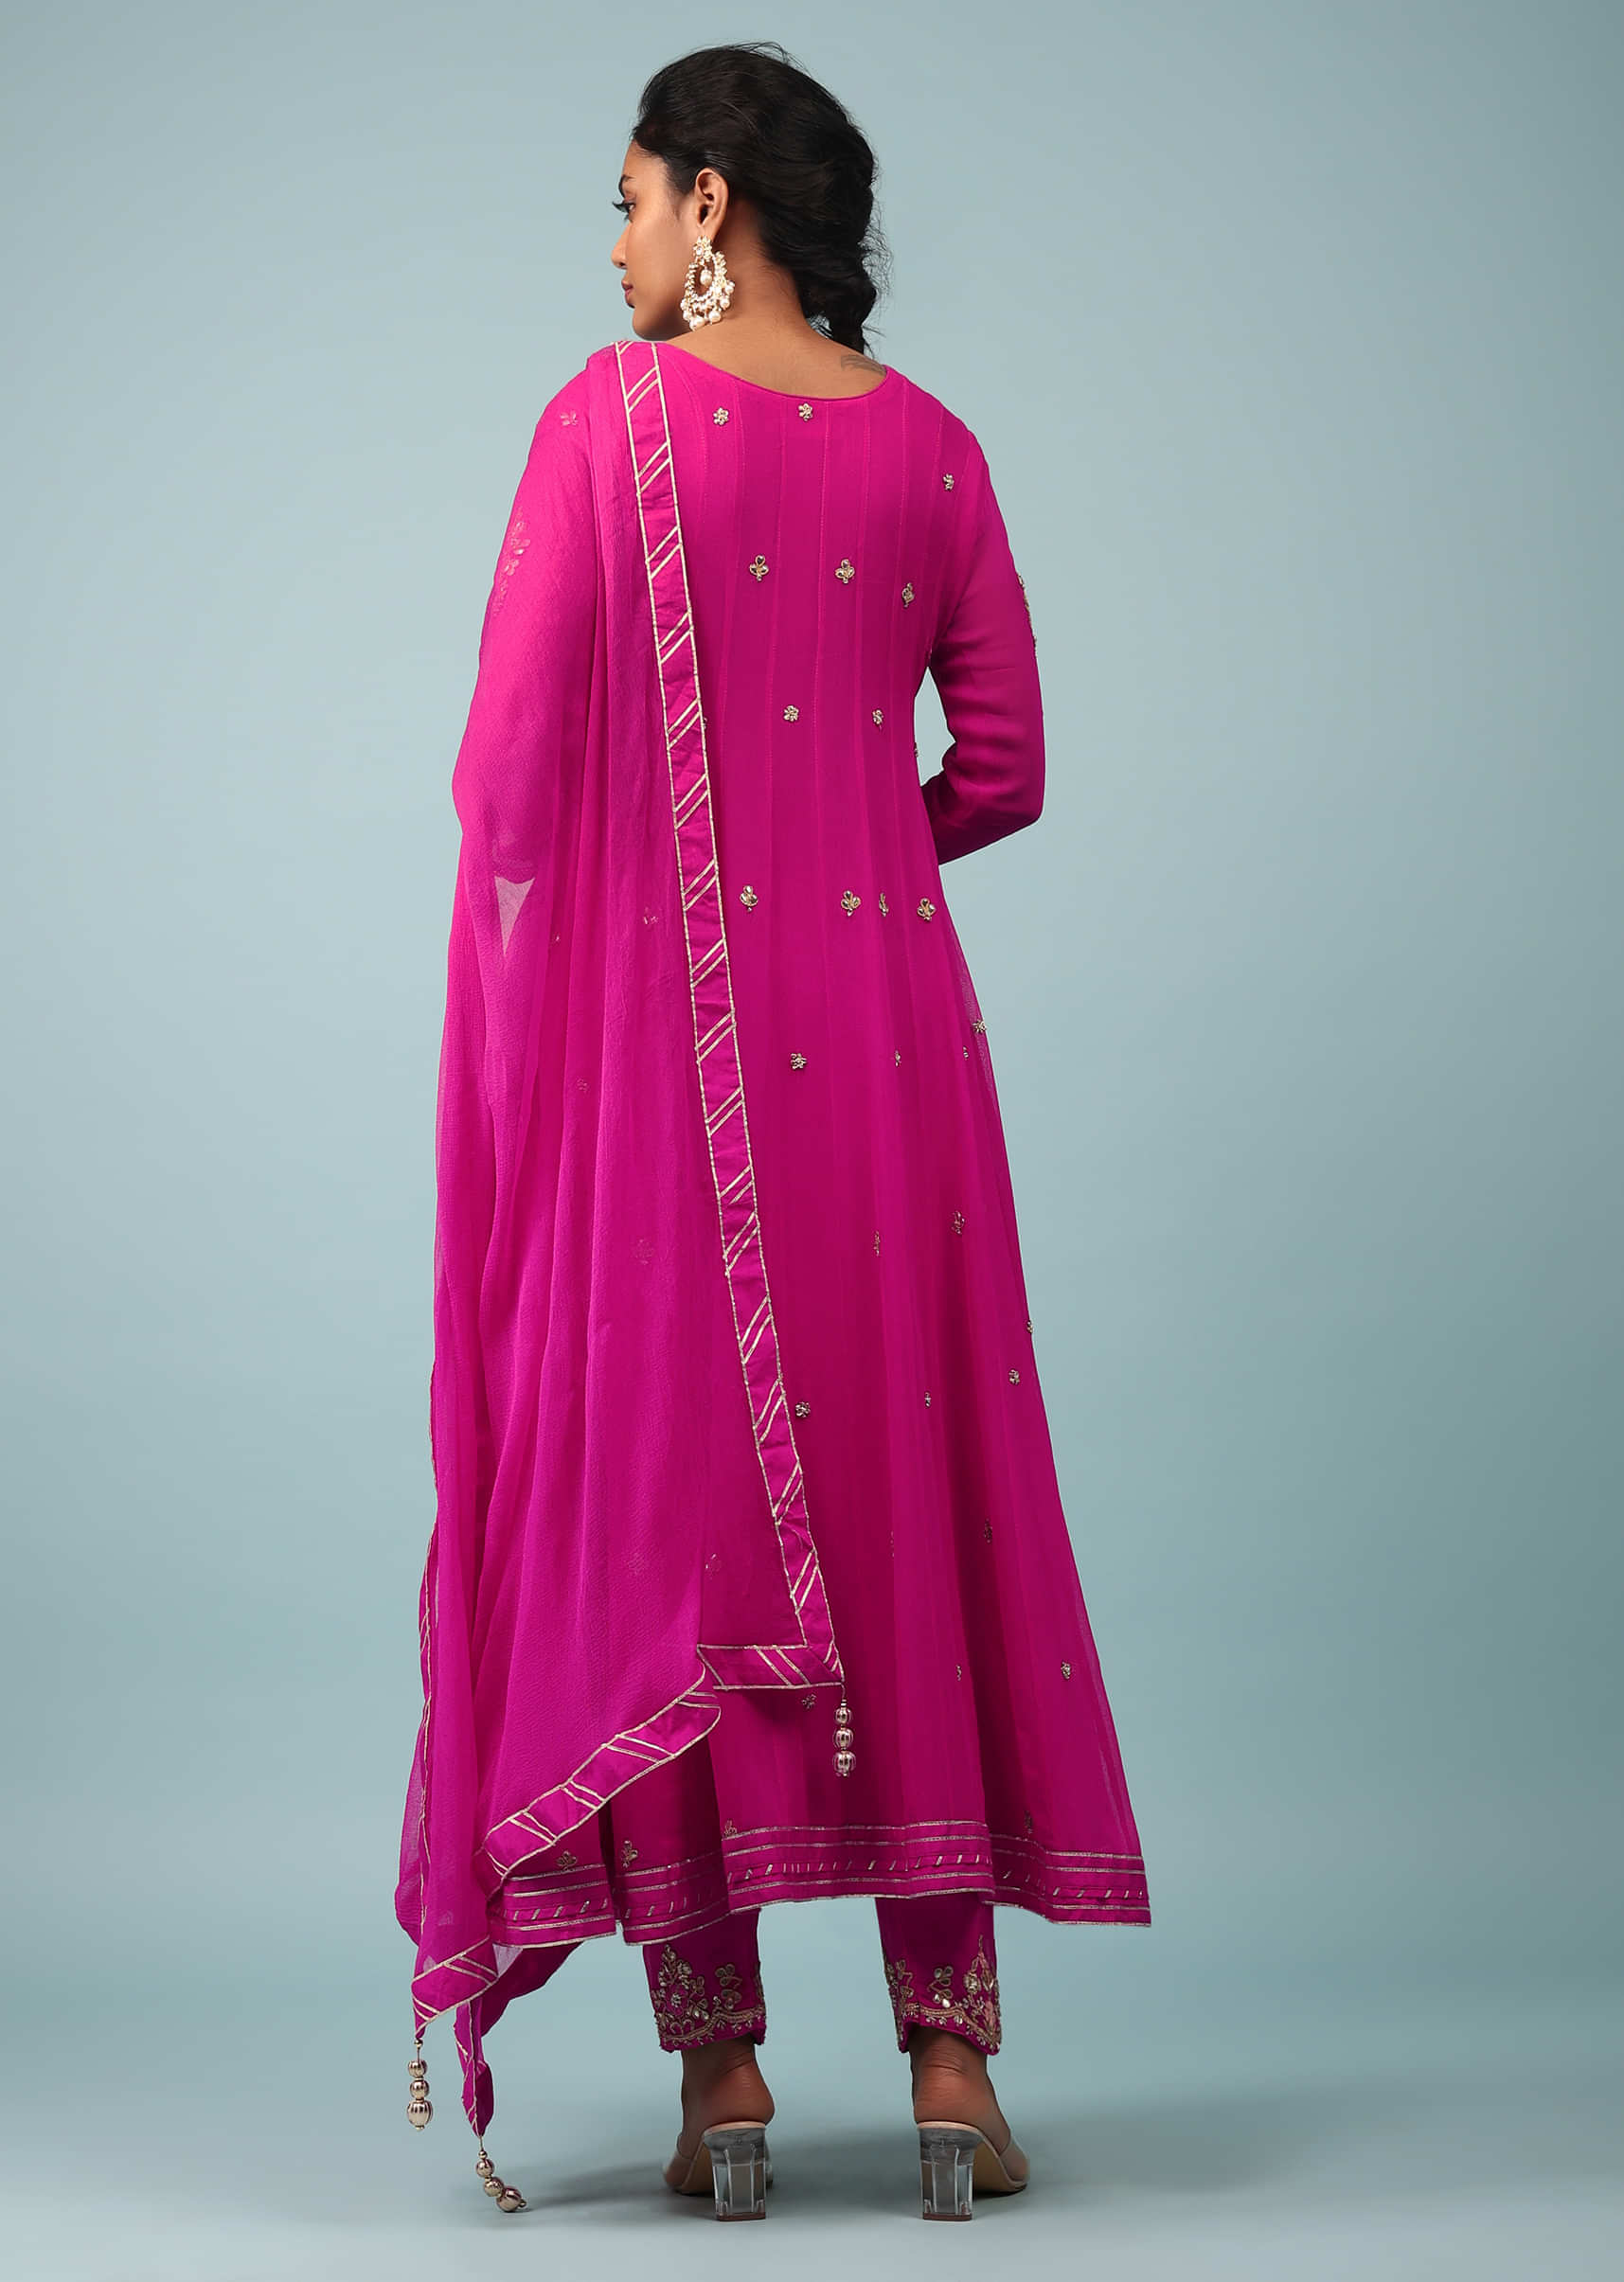 Beetroot Pink Embroidered Anarkali Suit In Georgette